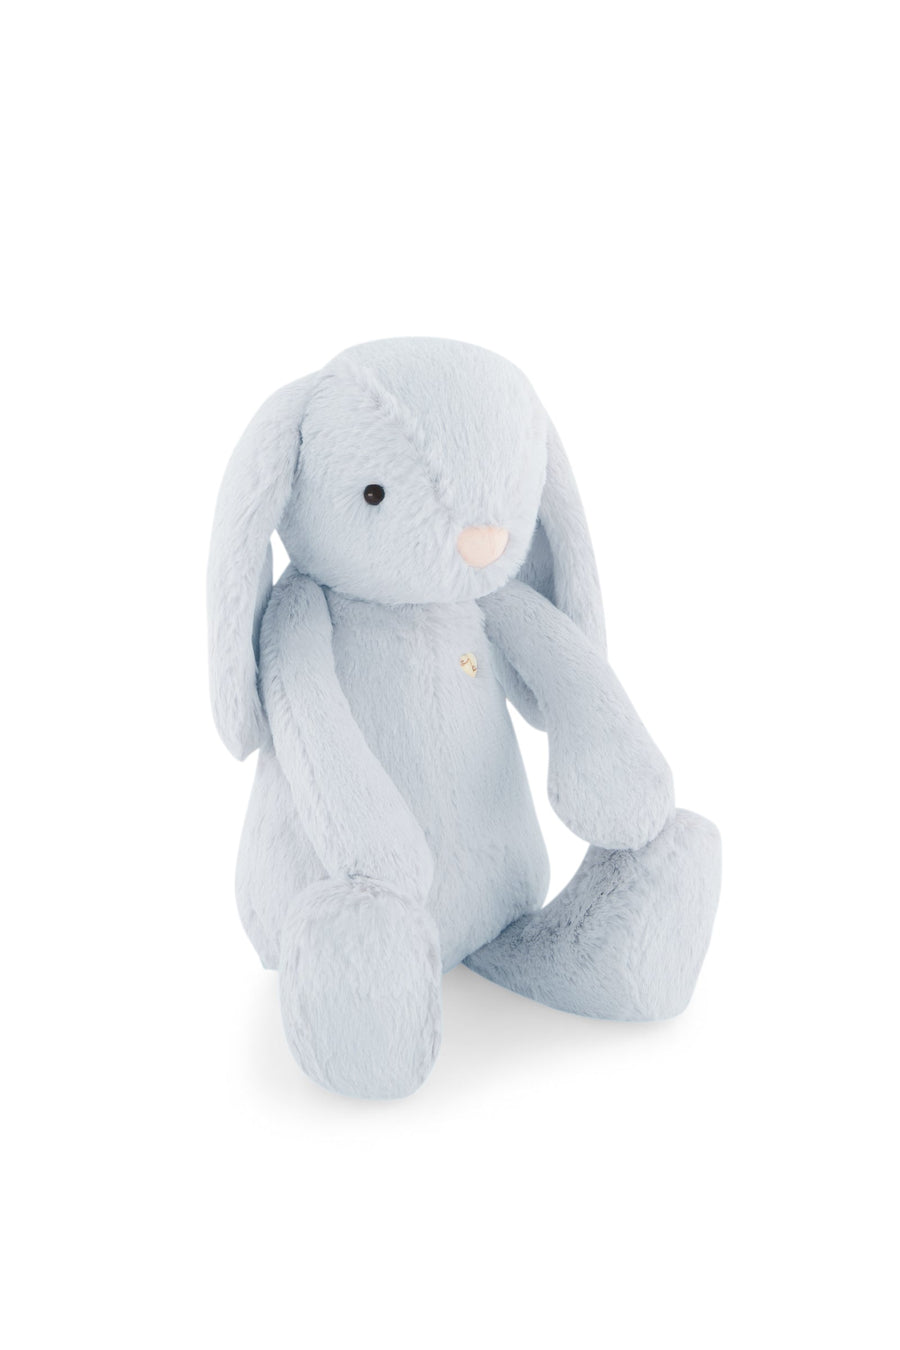 Snuggle Bunnies - Penelope the Bunny - Droplet Childrens Toy from Jamie Kay NZ